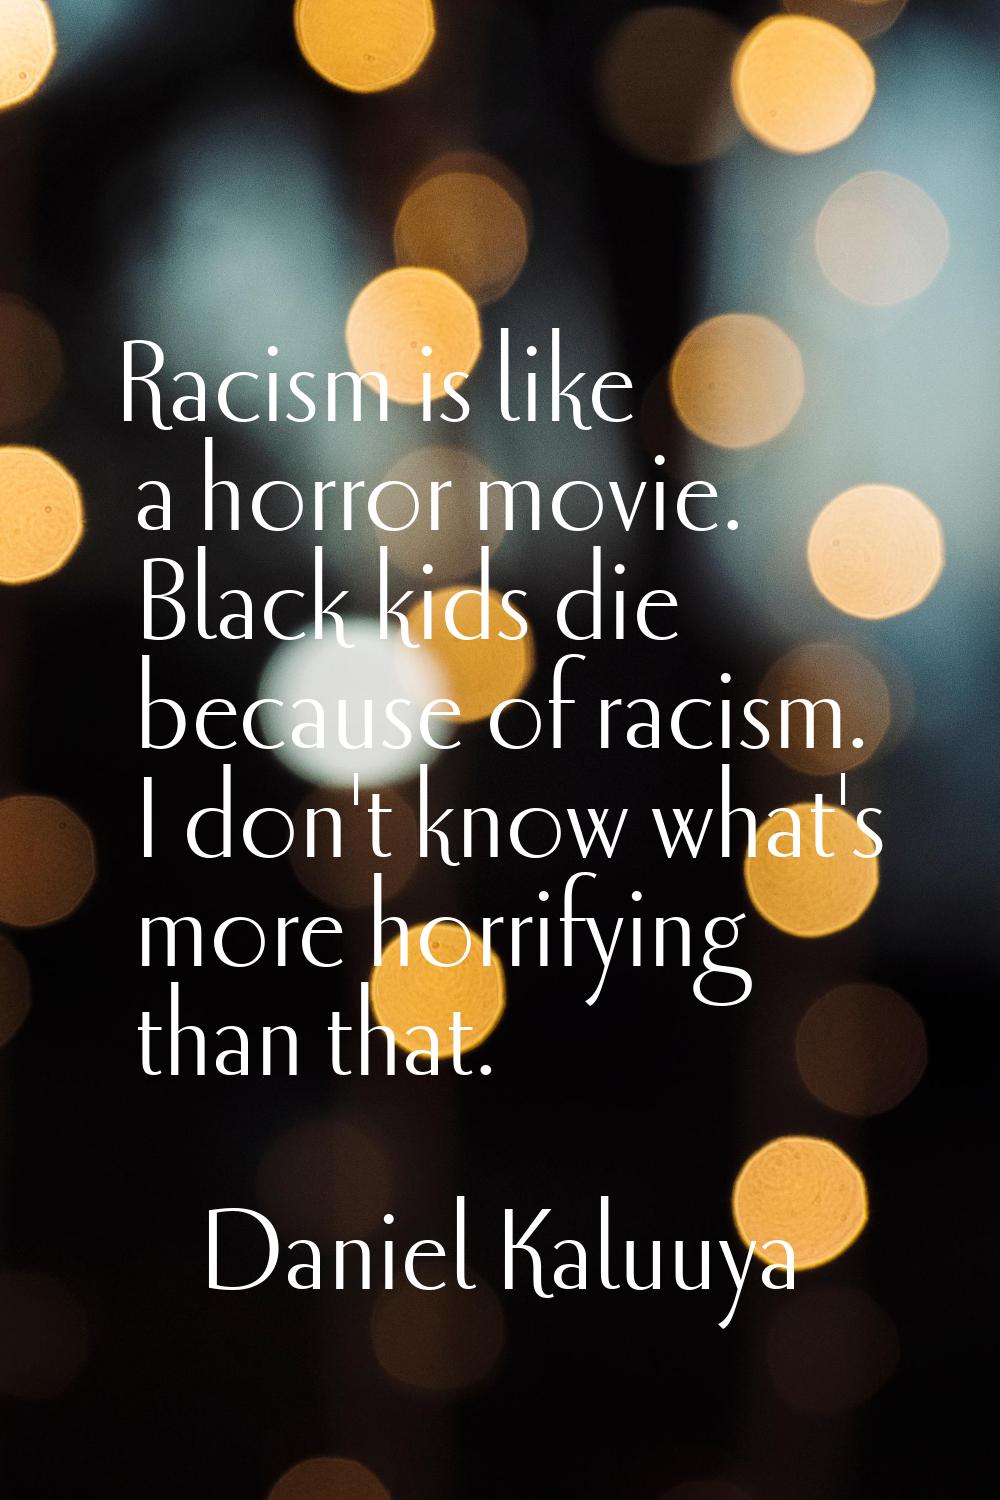 Racism is like a horror movie. Black kids die because of racism. I don't know what's more horrifyin